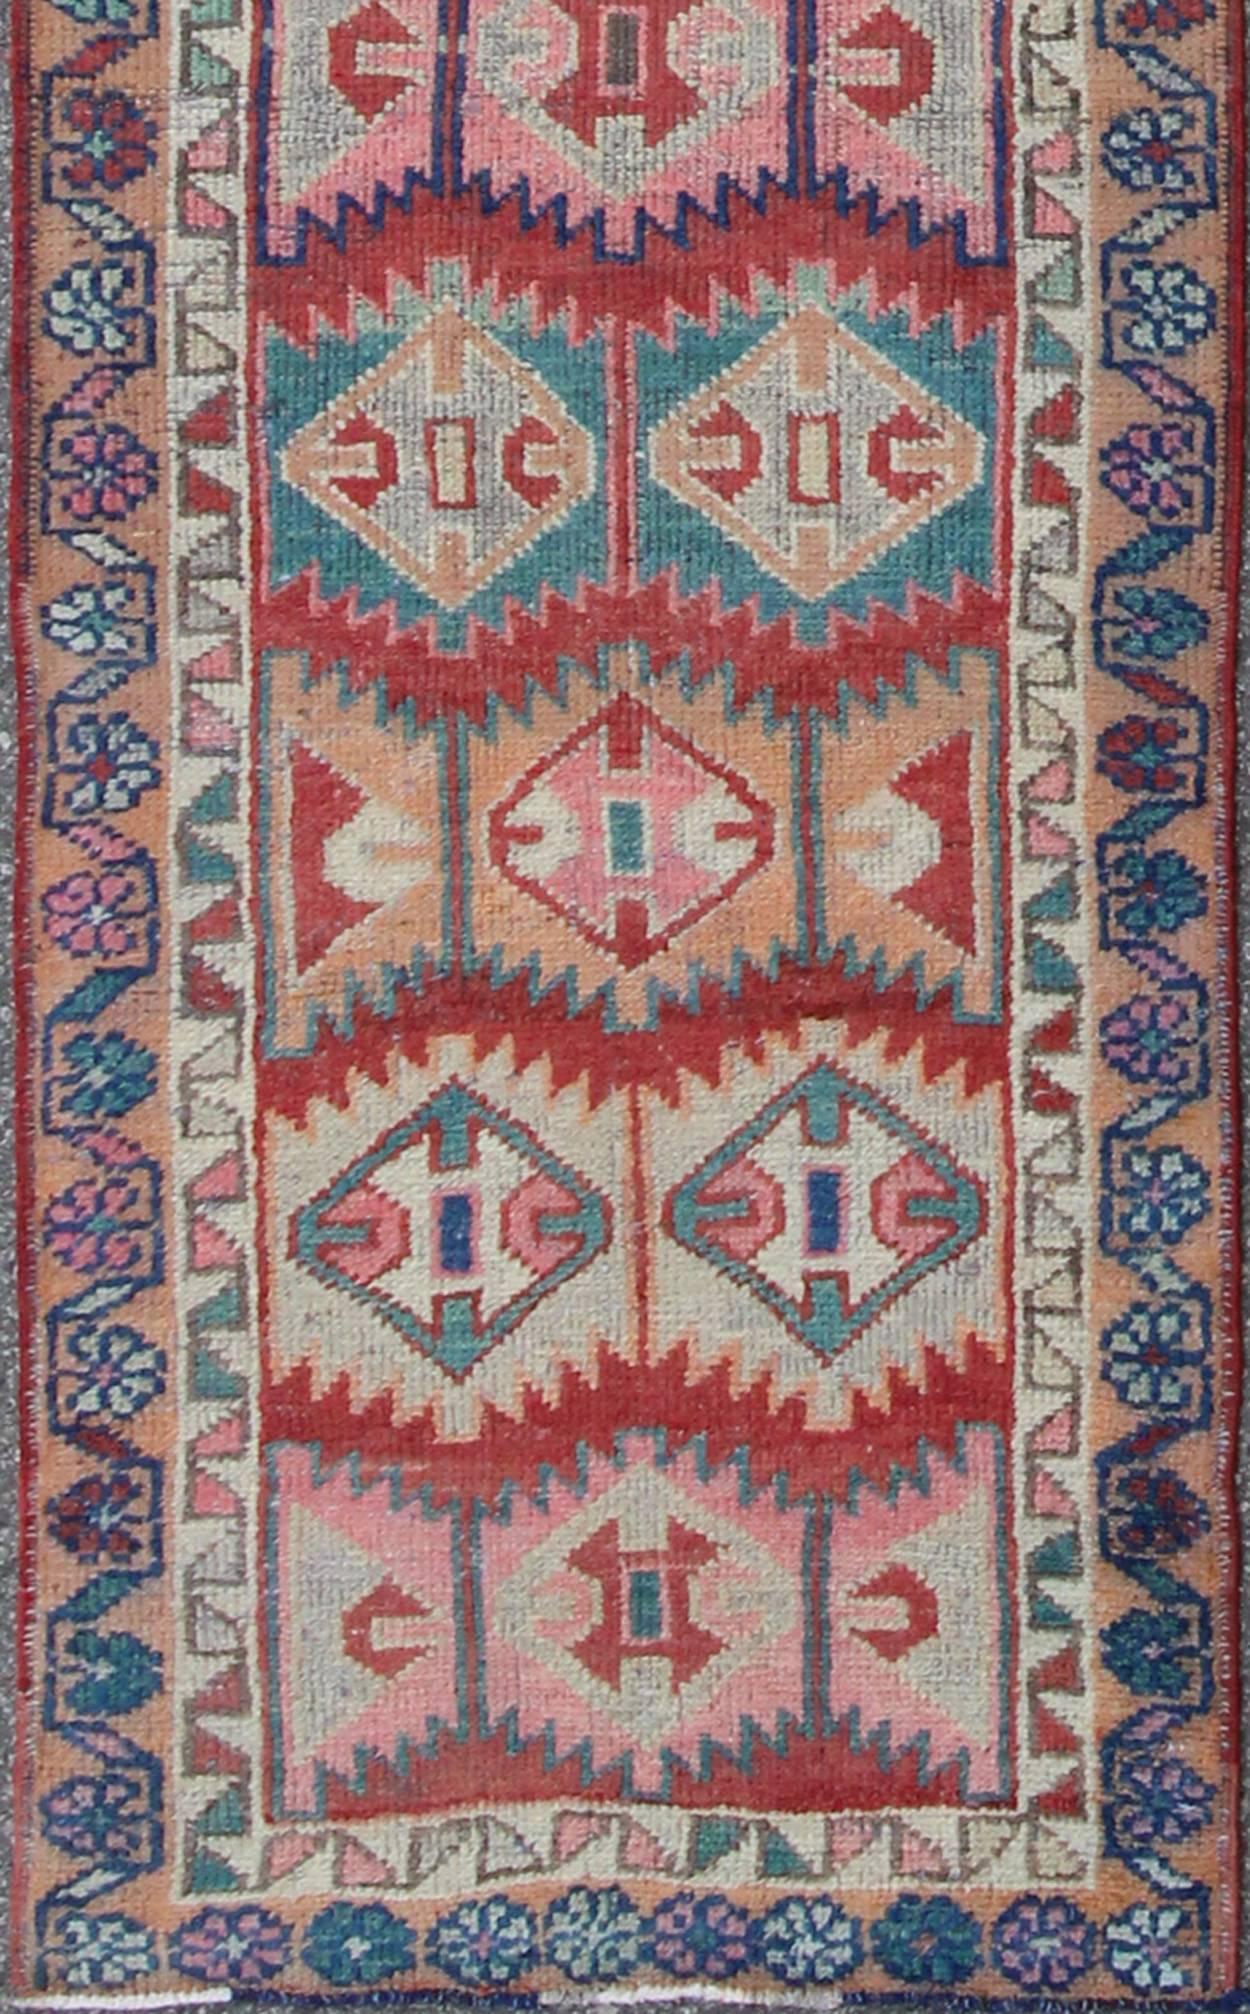 Unique and Colorful Turkish Oushak Runner with Intricate Geometric Pattern
This Turkish Oushak runner features repeating geometric motifs of varying size, shape, and color. The two borders are an extension of this colorful geometric theme. Colors